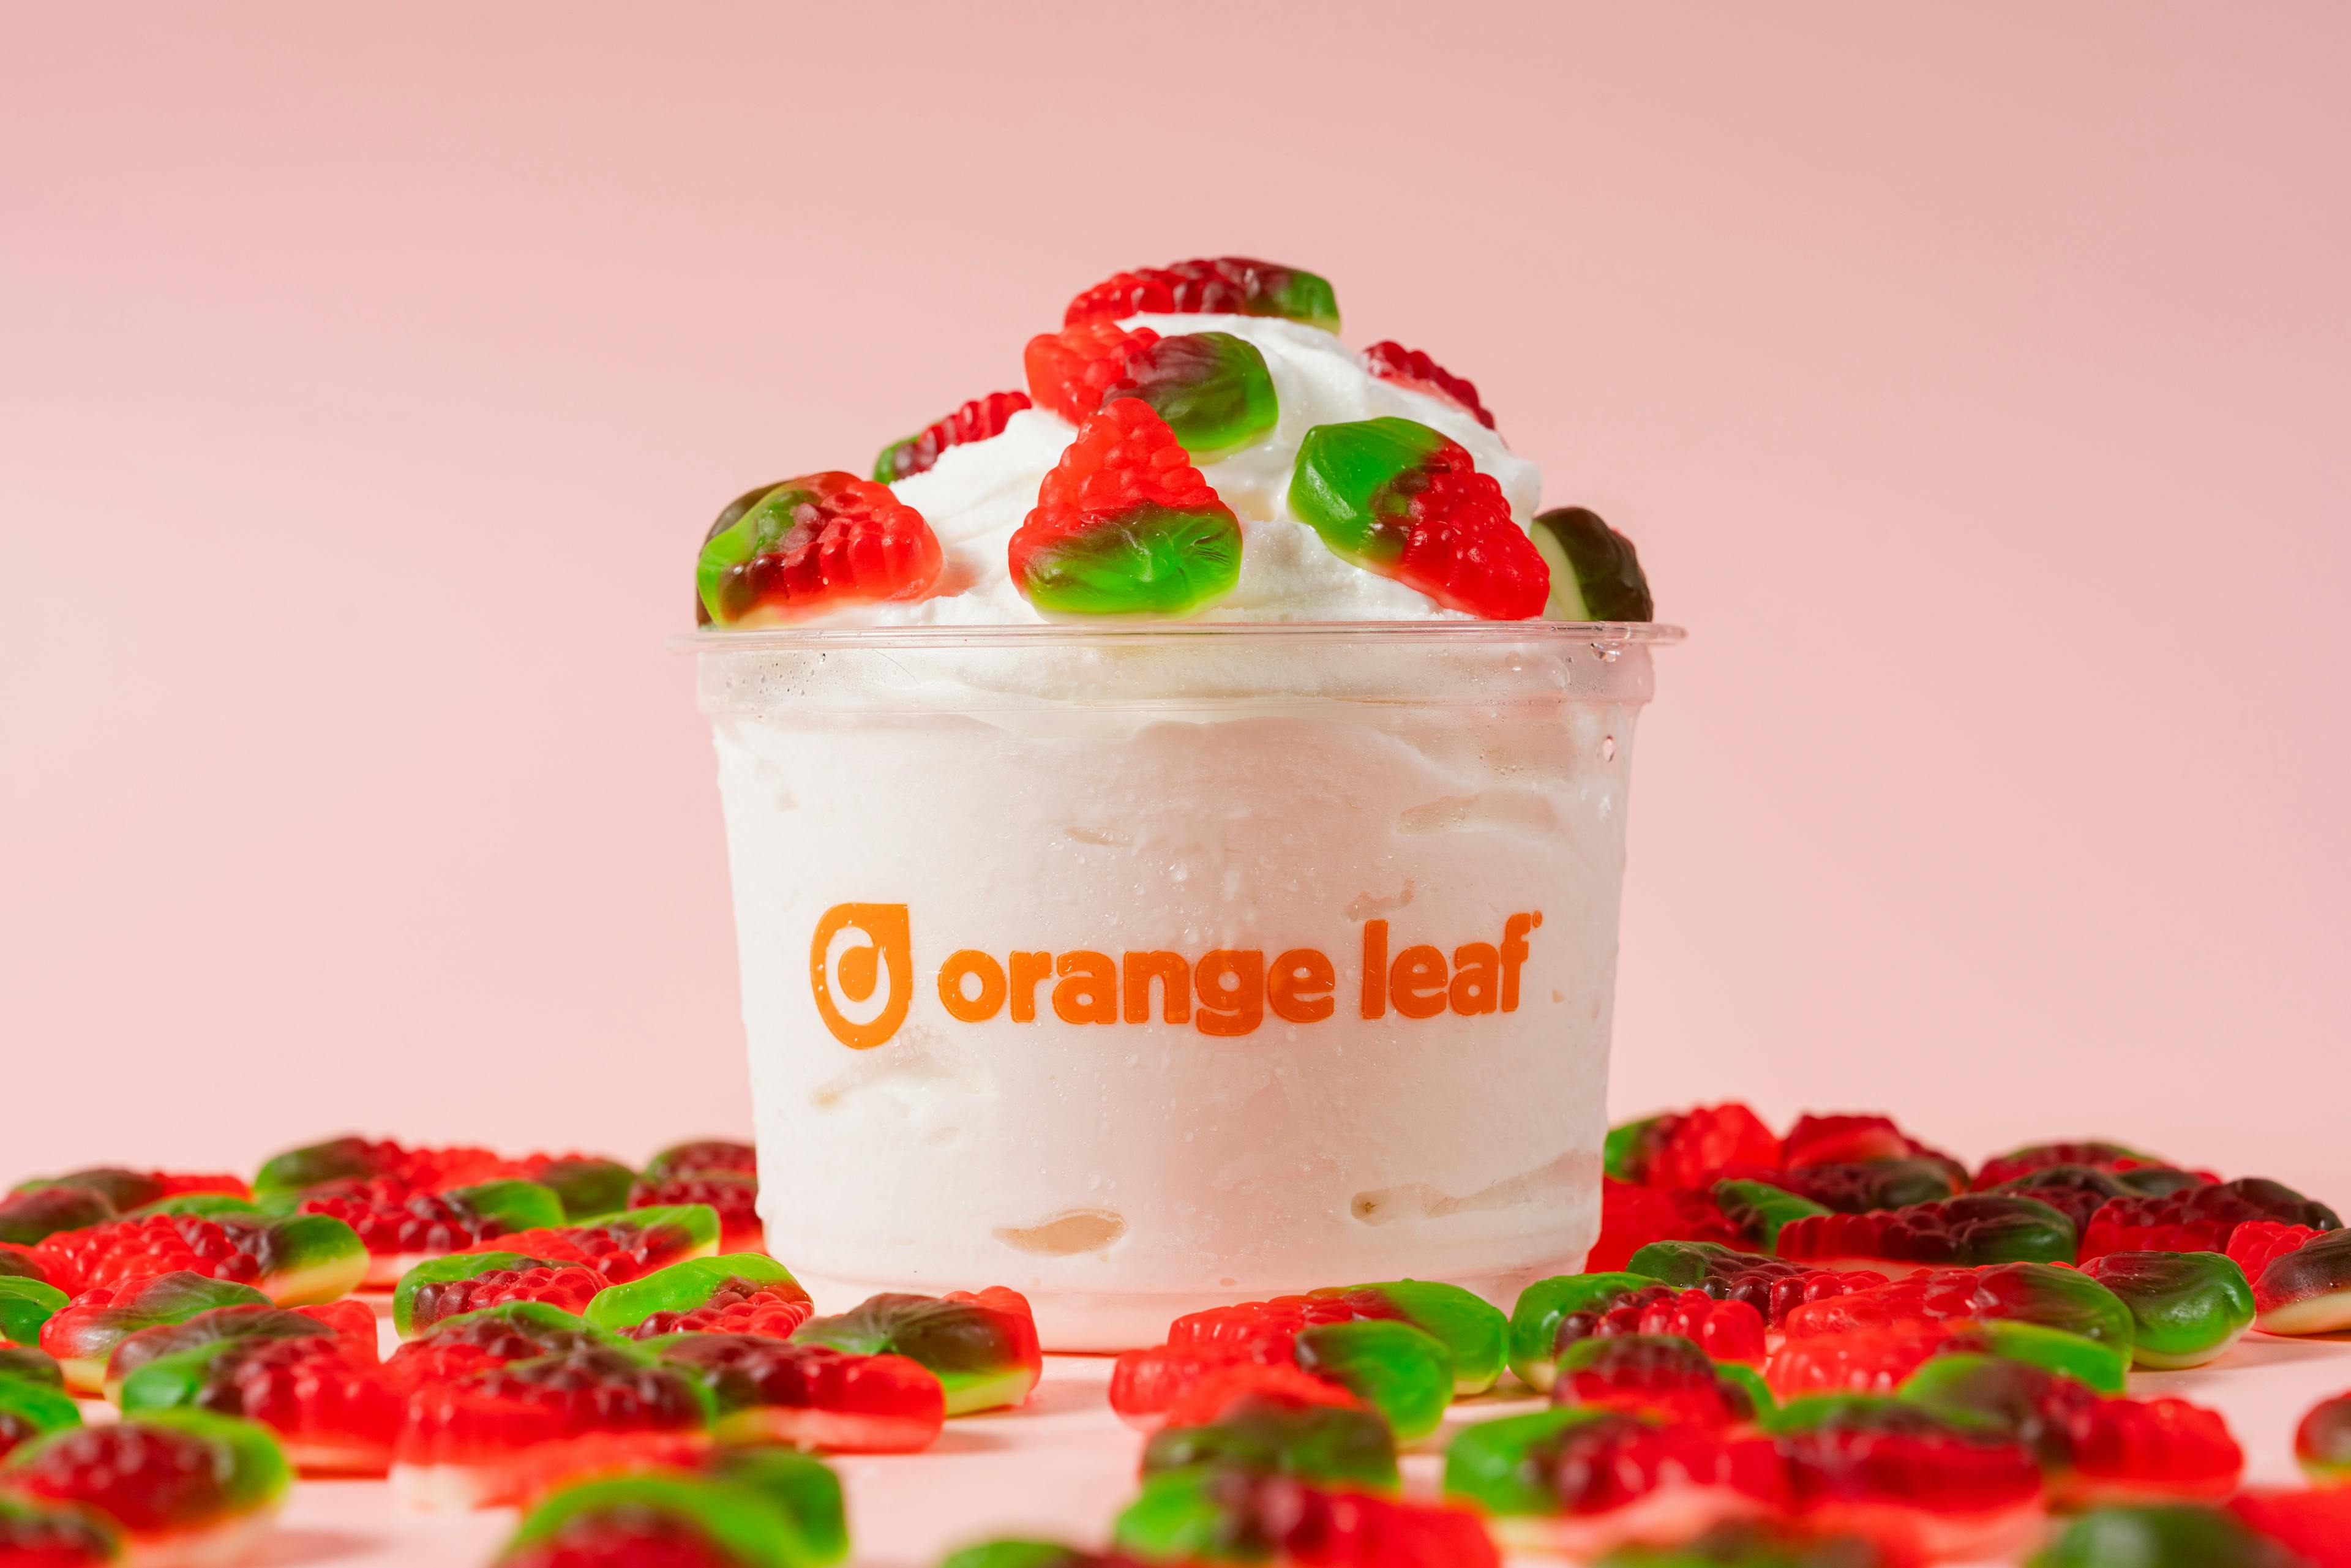 Orange Leaf featured froyo: Cheesecake and strawberry gummies